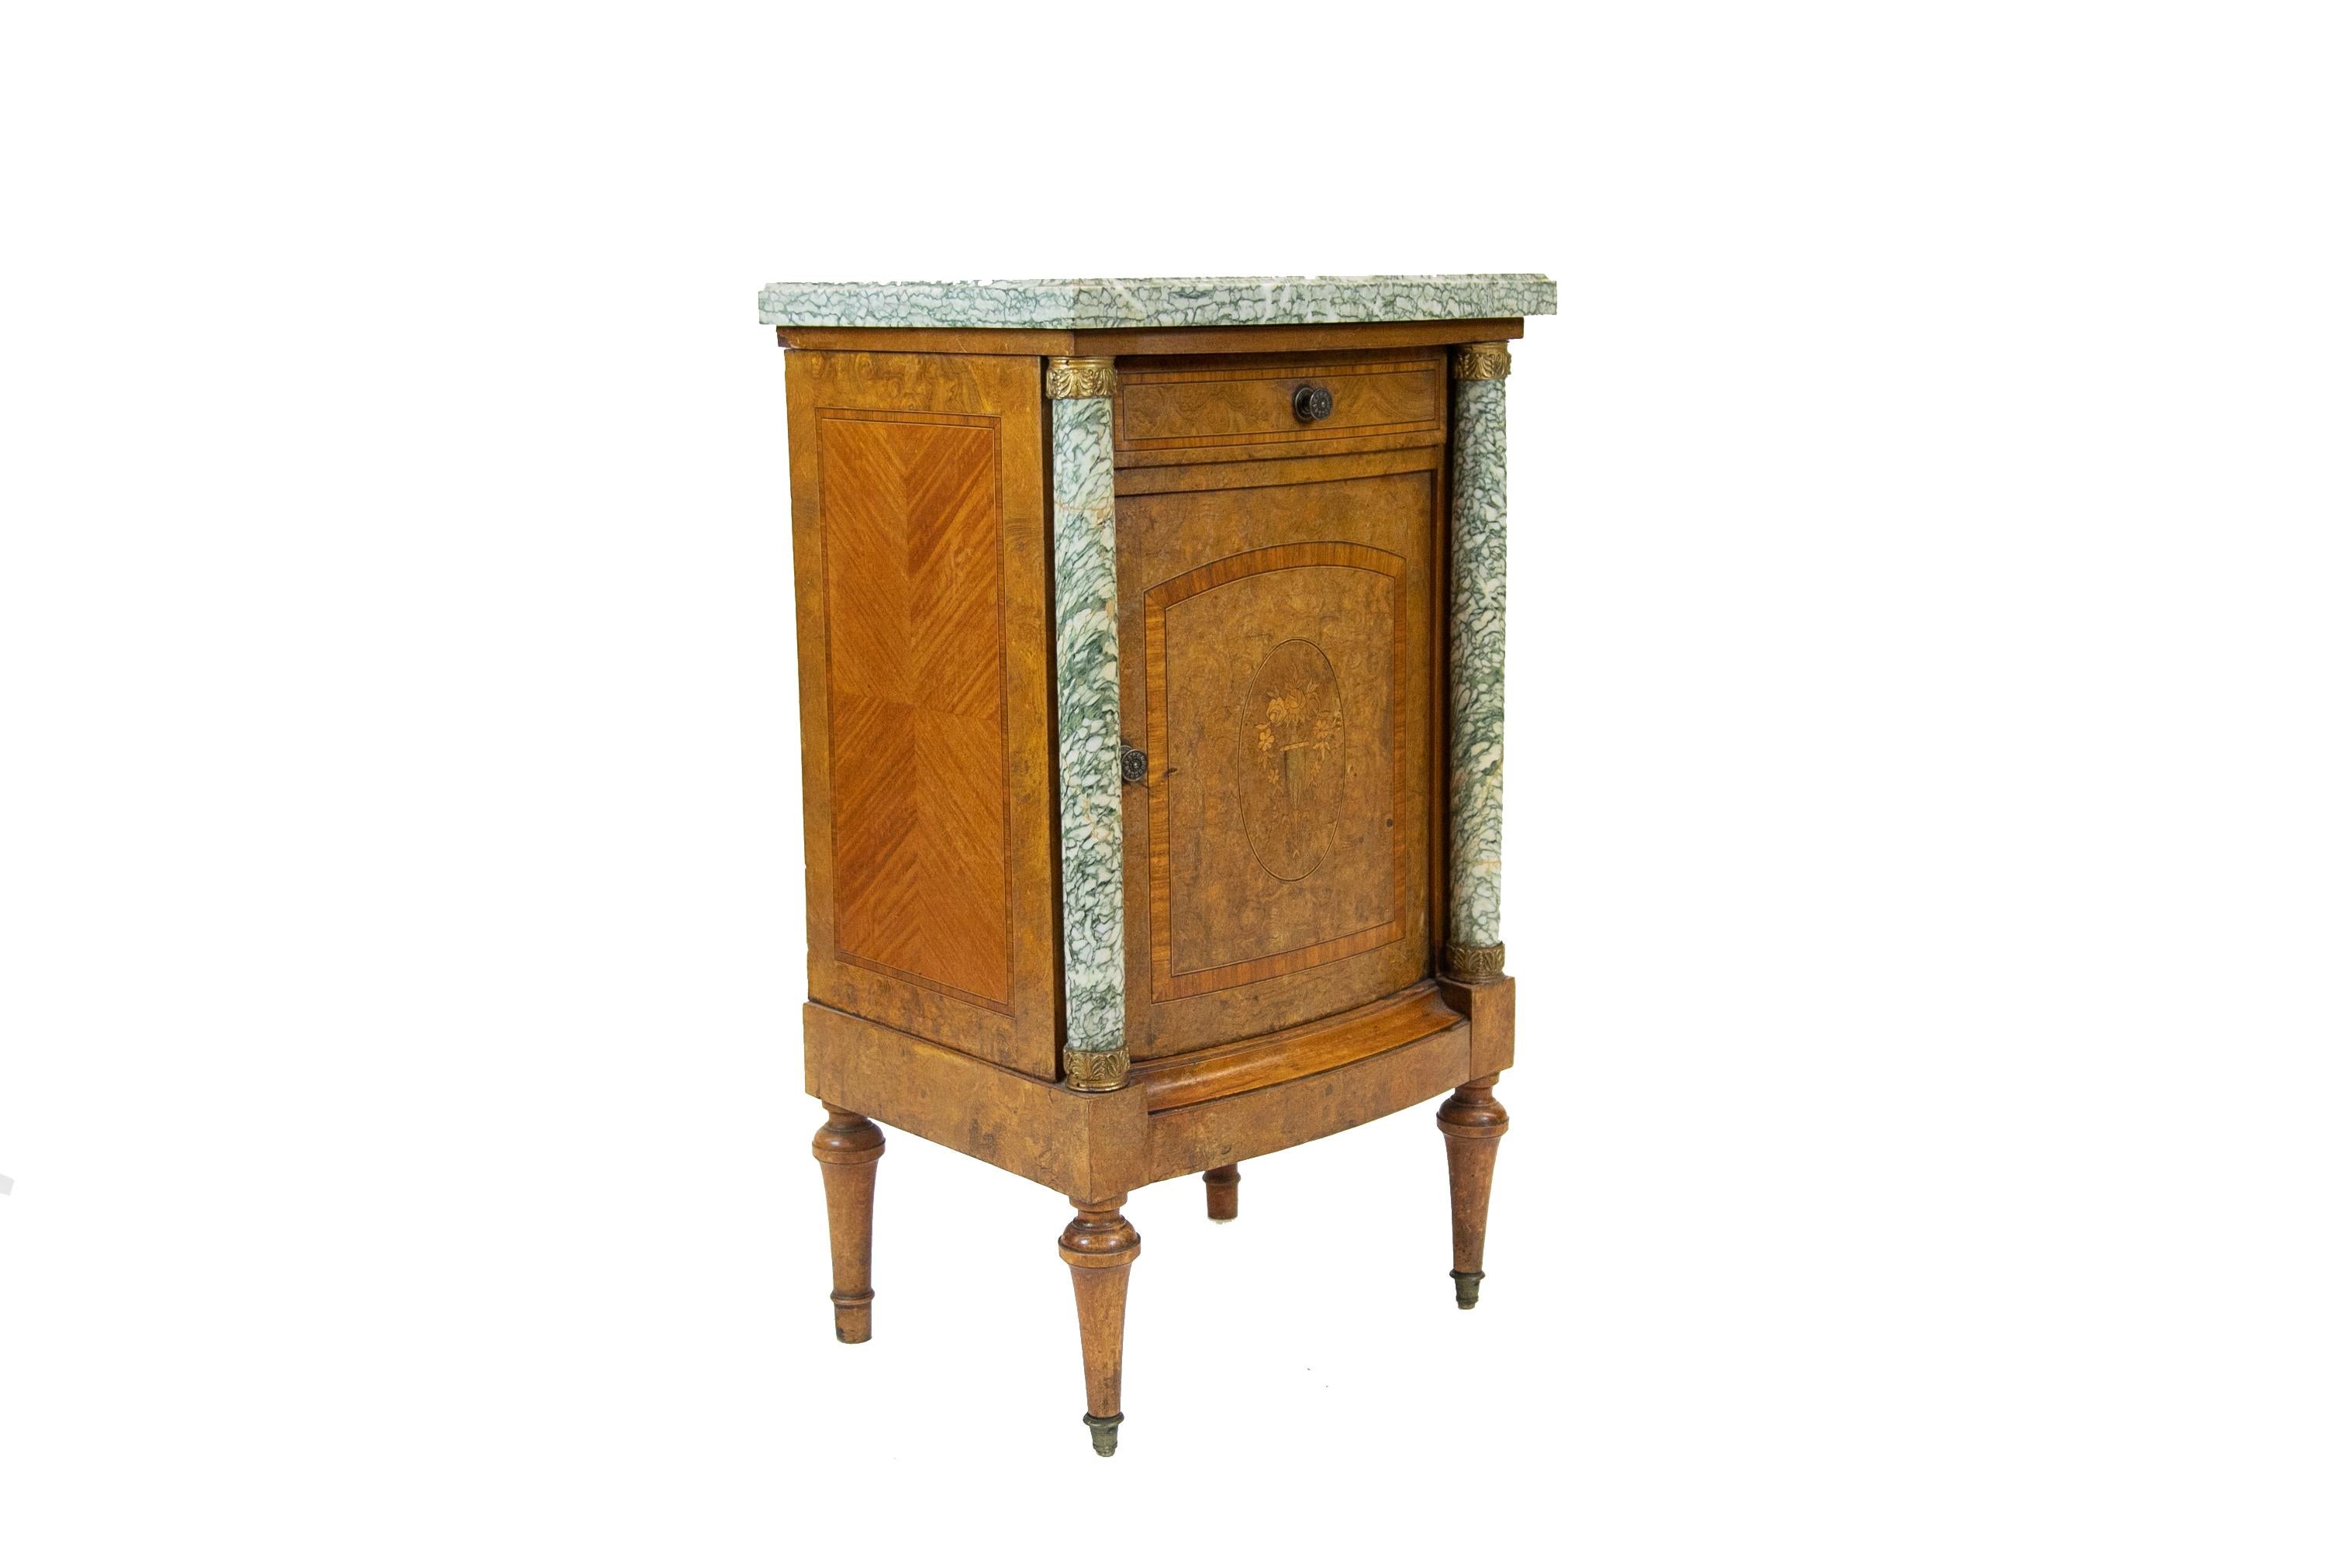 French bow front burl walnut marble-top cupboard, has marble columns with brass capitals and bases; the door is cross banded and inlaid with a satinwood floral urn. Inlaid panels are crossbanded on the sides, two interior shelves. Turned legs end in